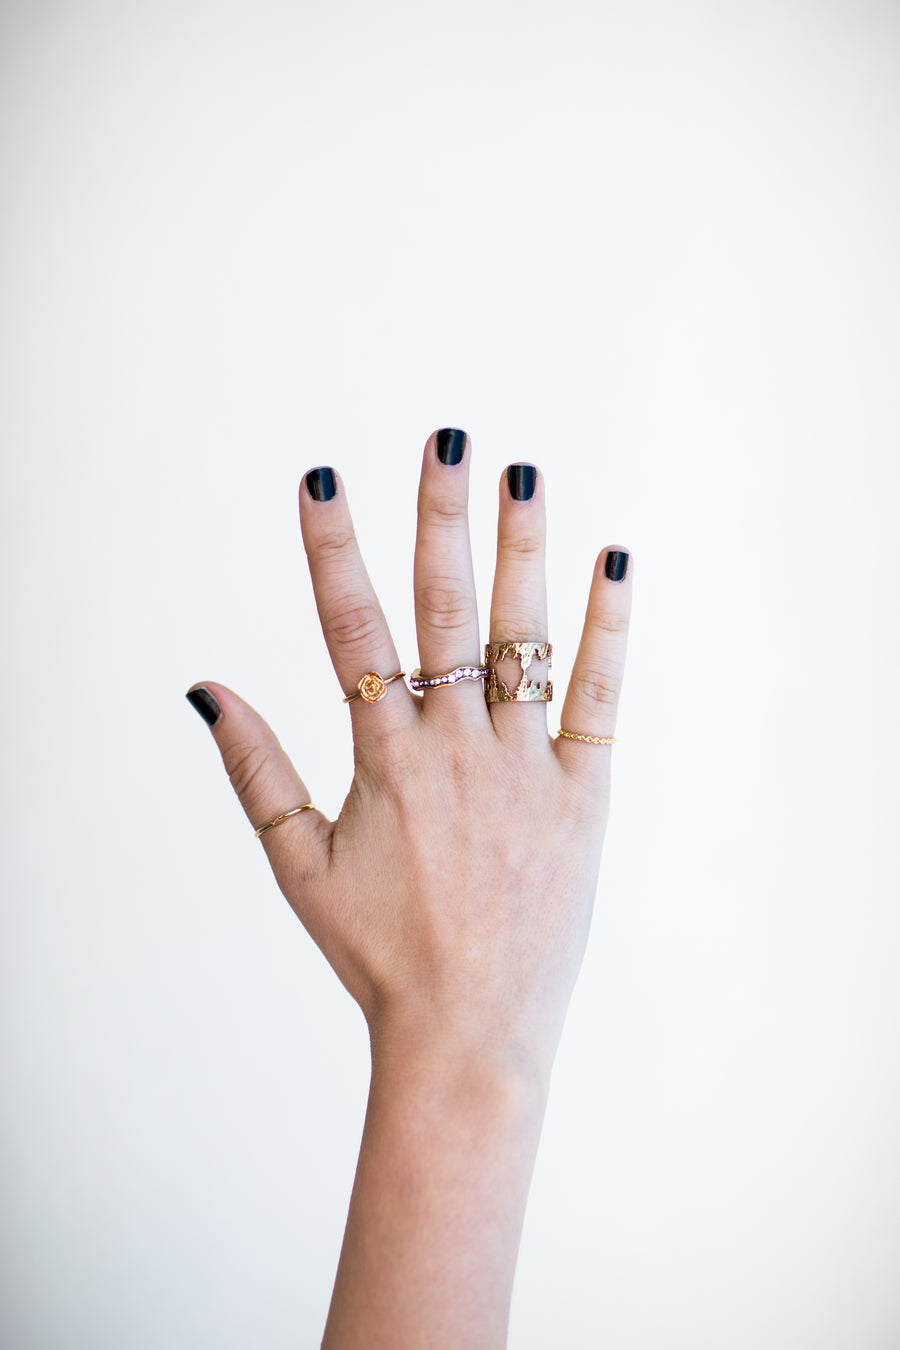 Gift Time: 20% Off All Rings